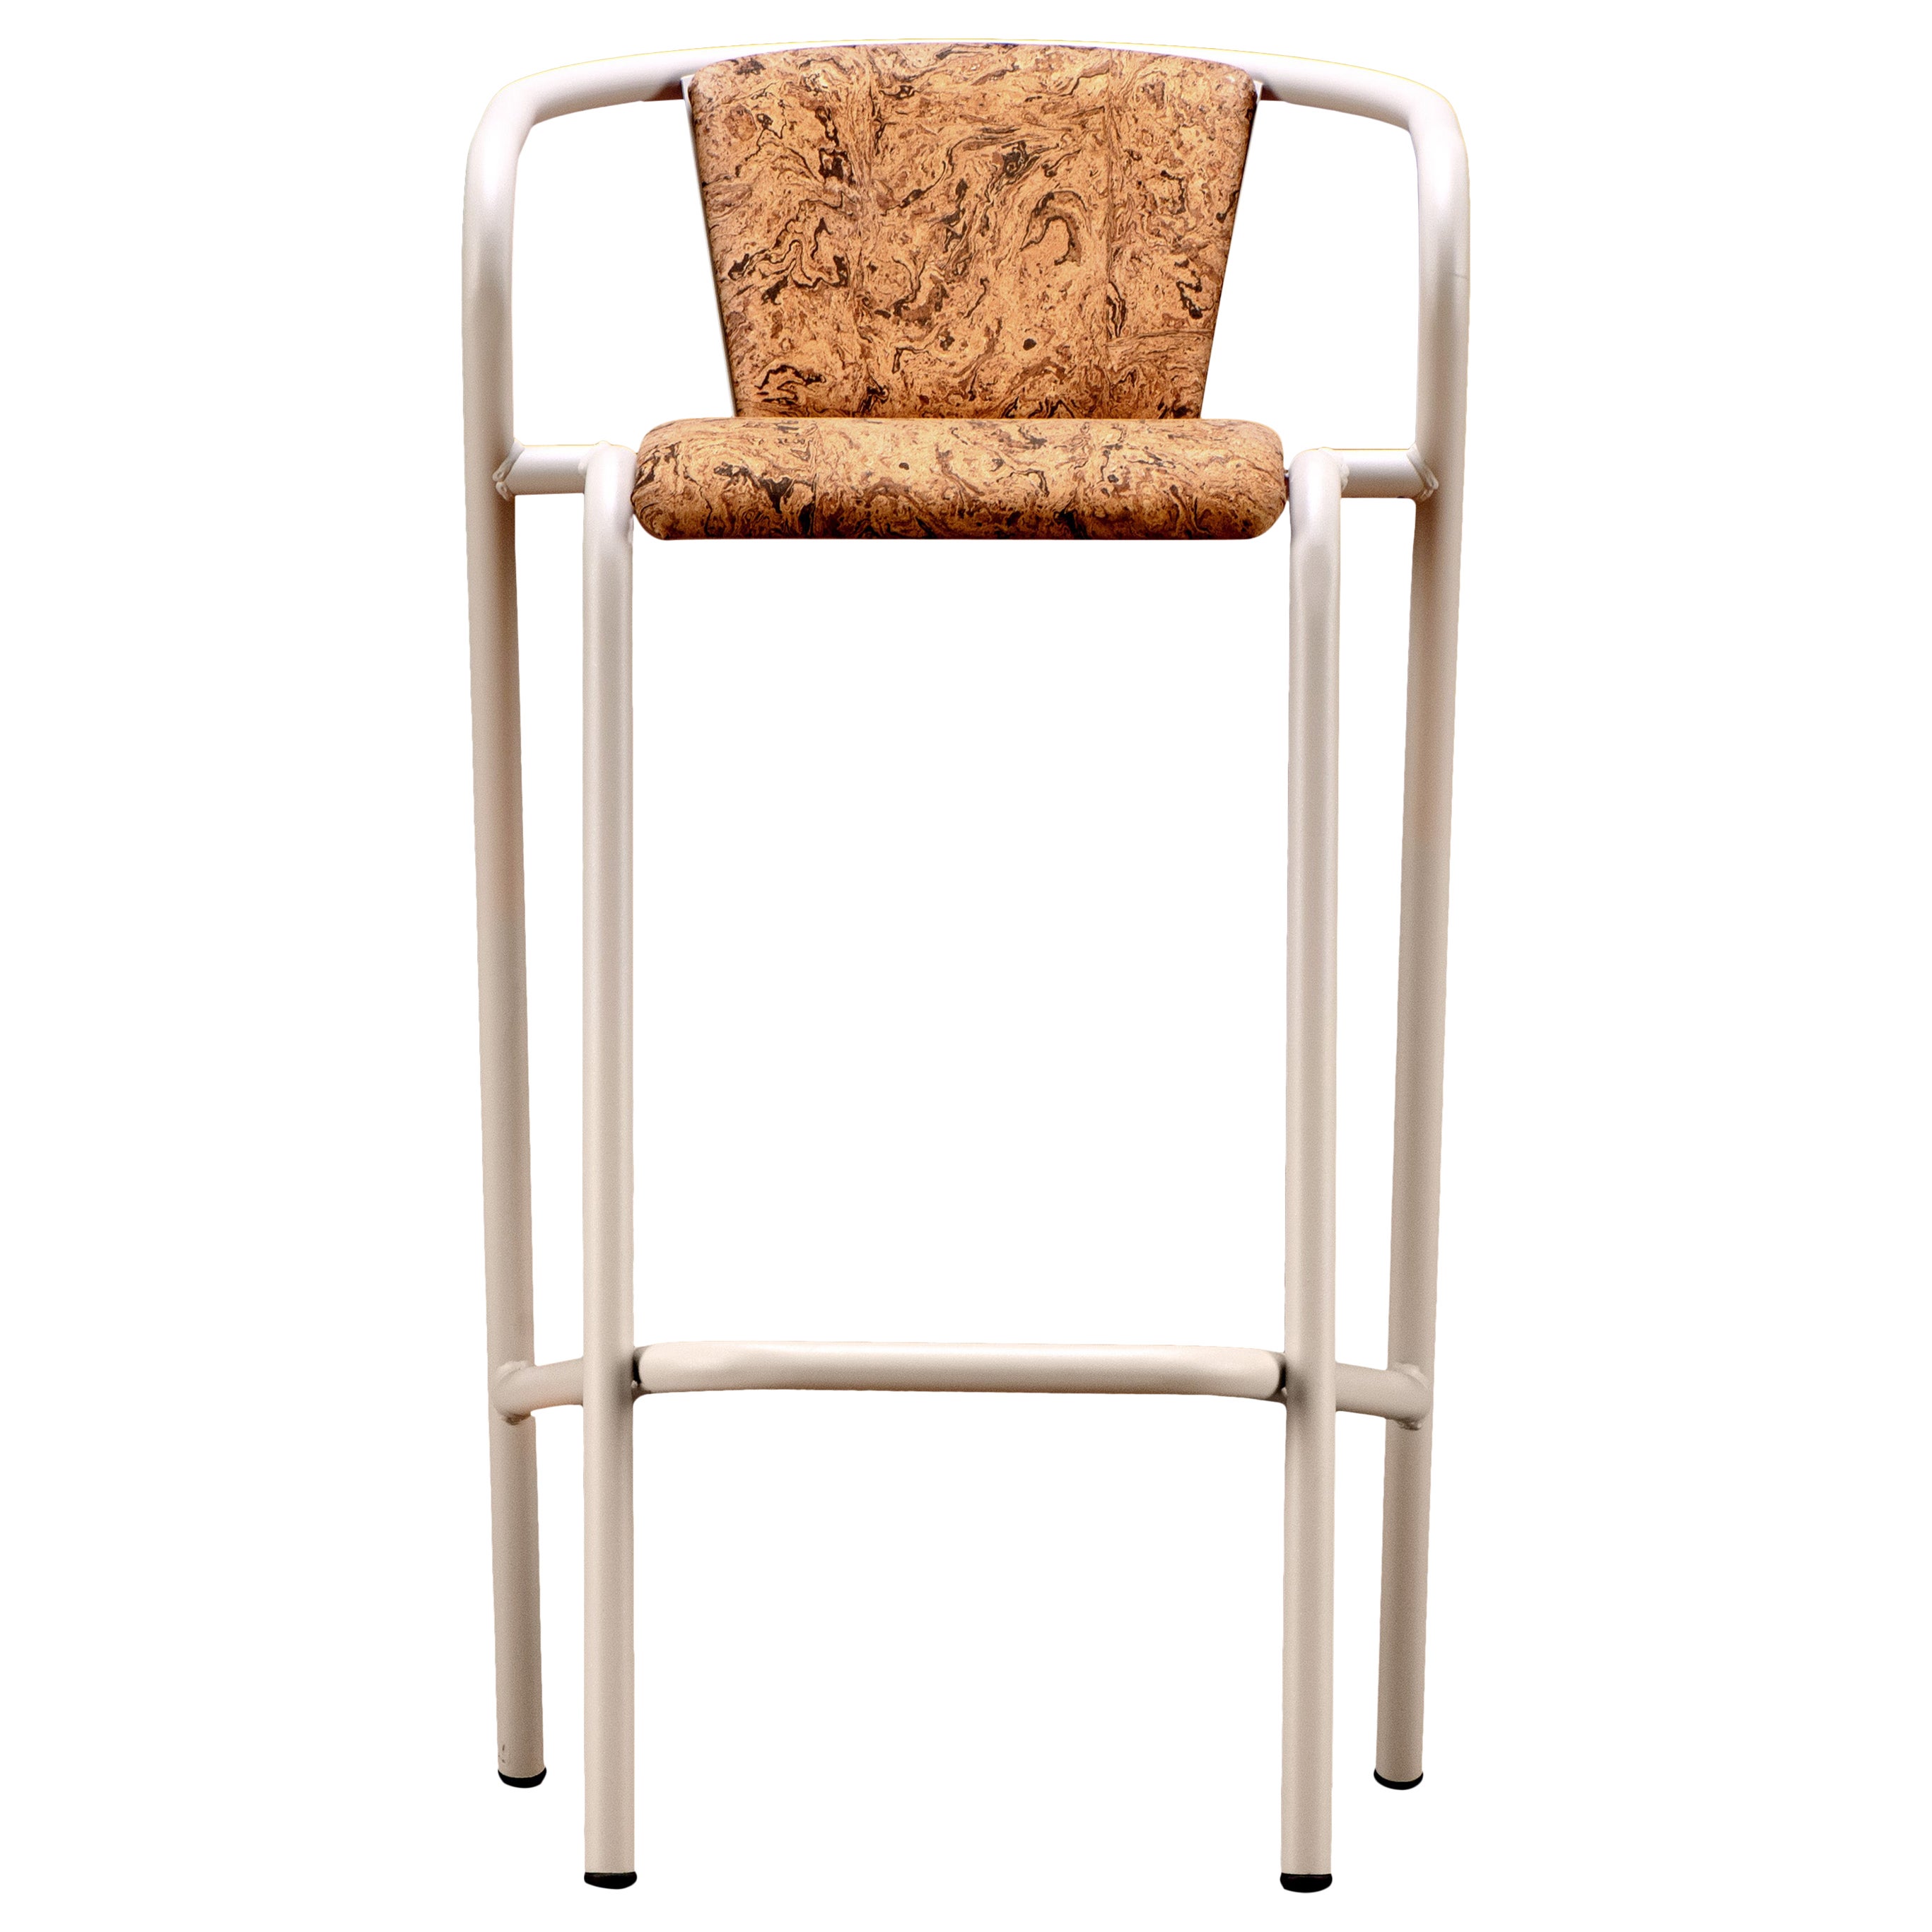 Bicachair Modern Steel High Stool Chair Champagne, Upholstery in Natural Cork For Sale